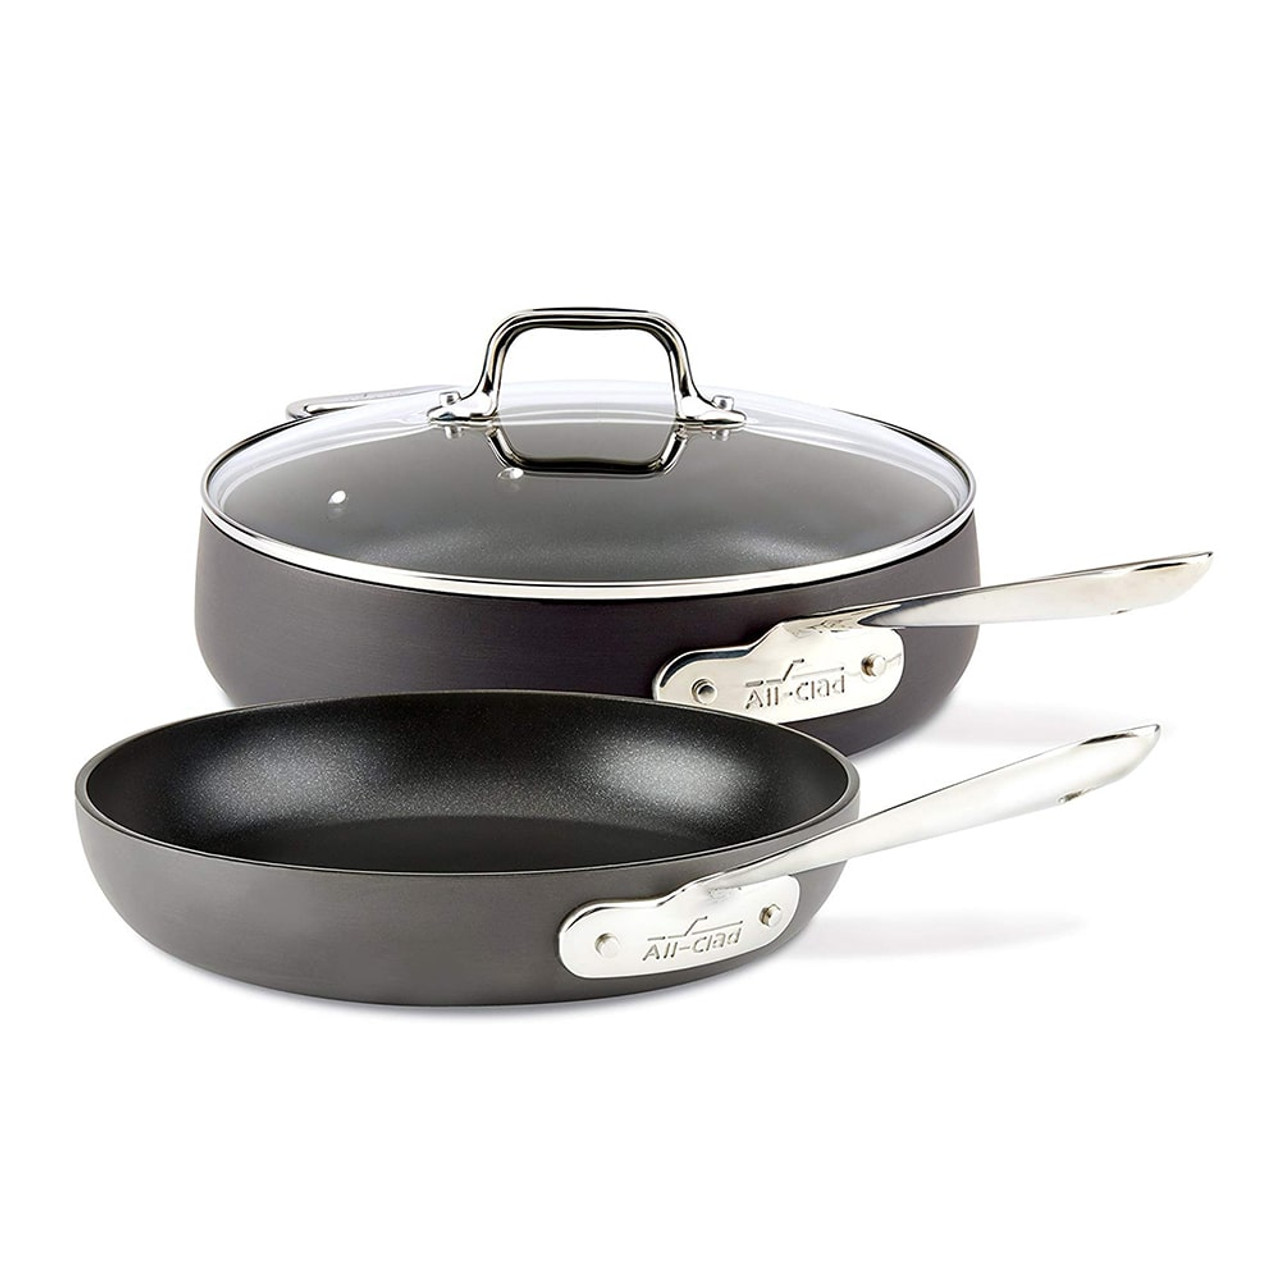 All-Clad HA1 5 Piece Nonstick Hard-Anodized Cookware Set